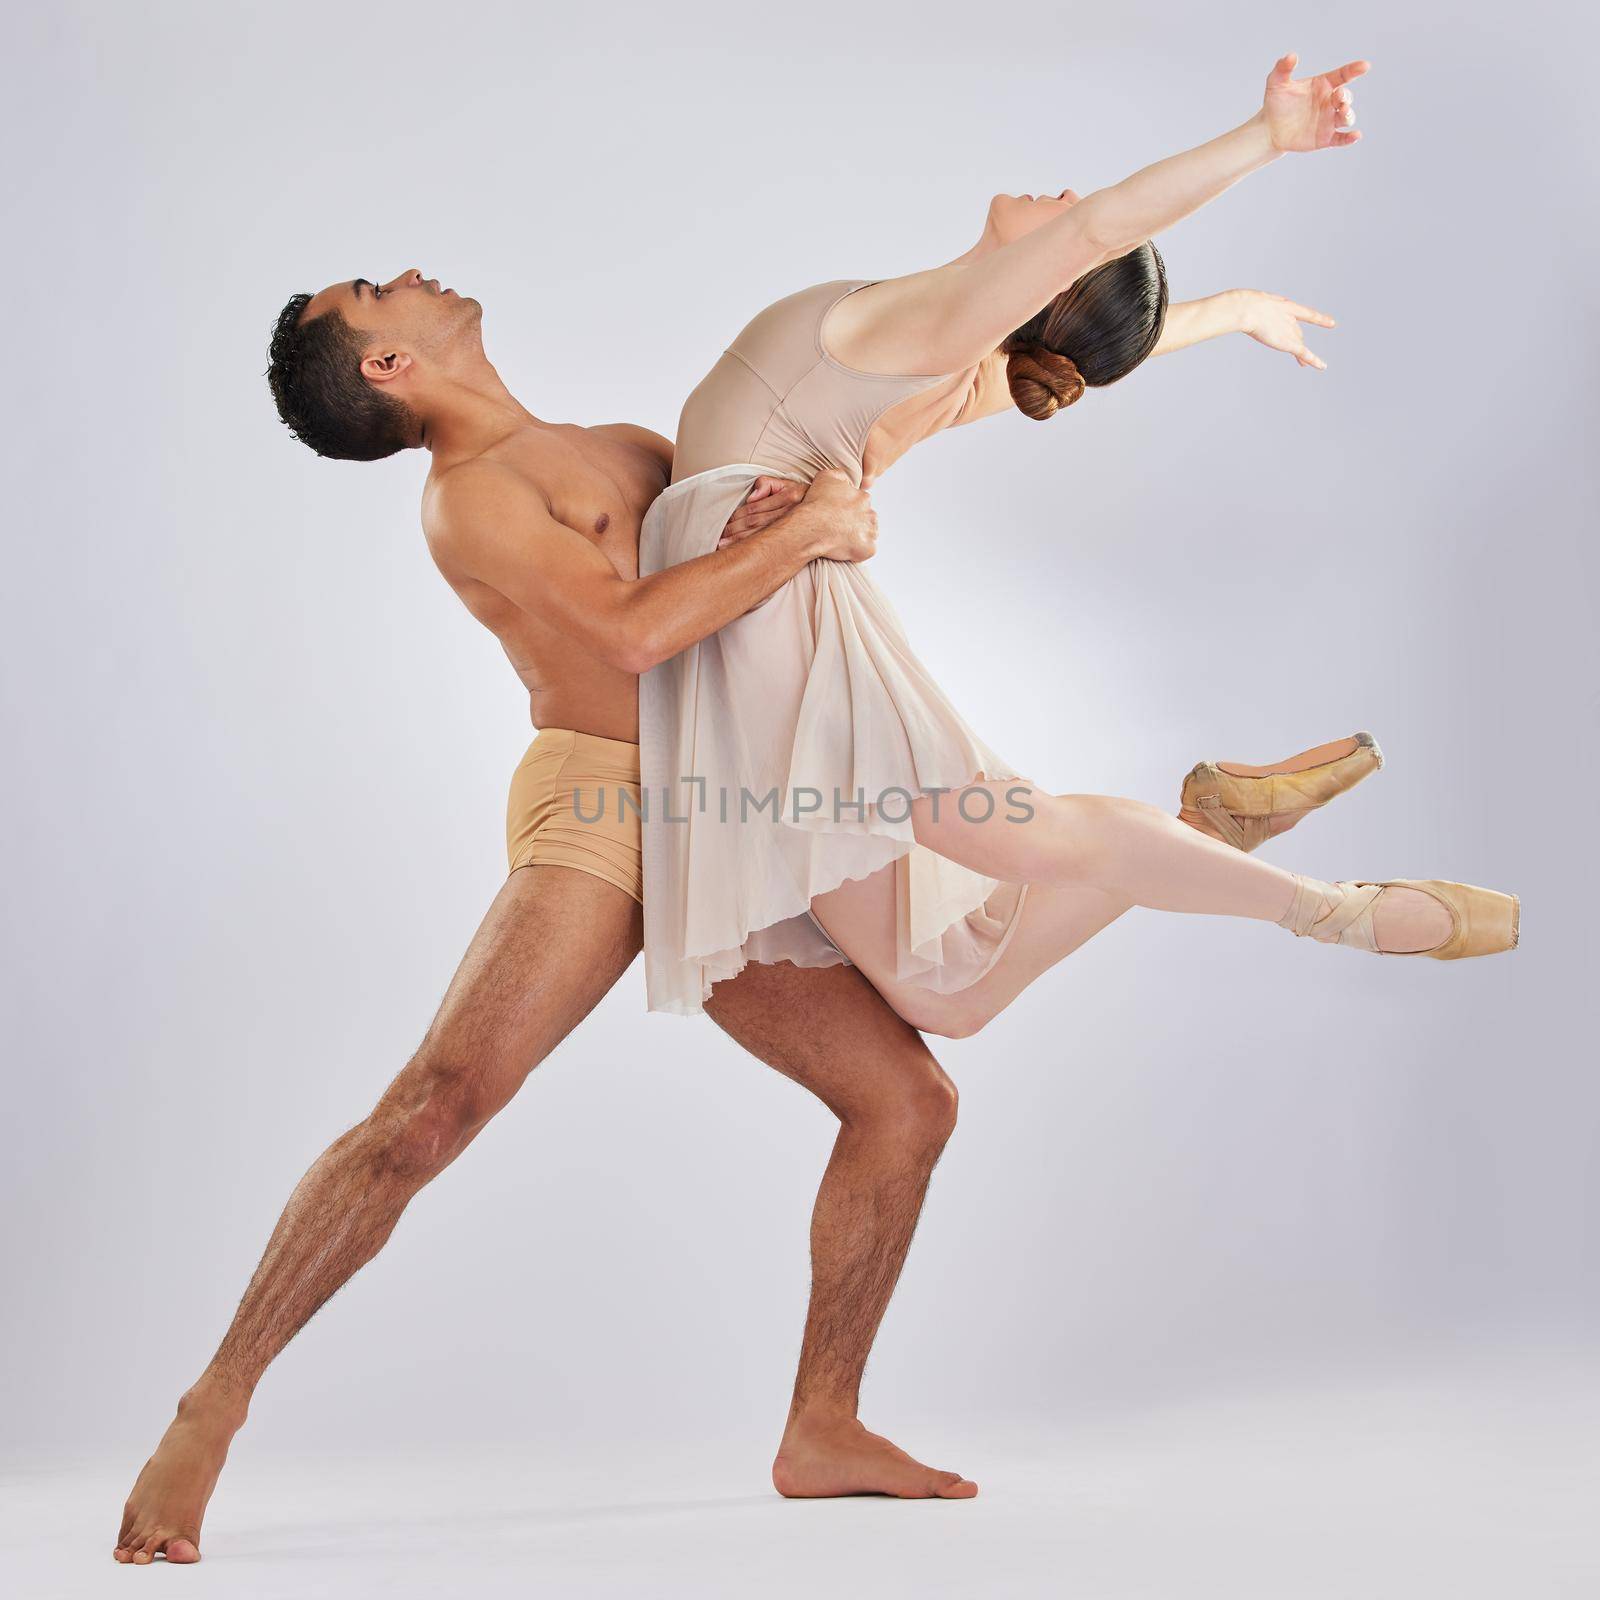 The heart just wants to dance. Studio shot of a young man and woman performing a ballet recital against a grey background